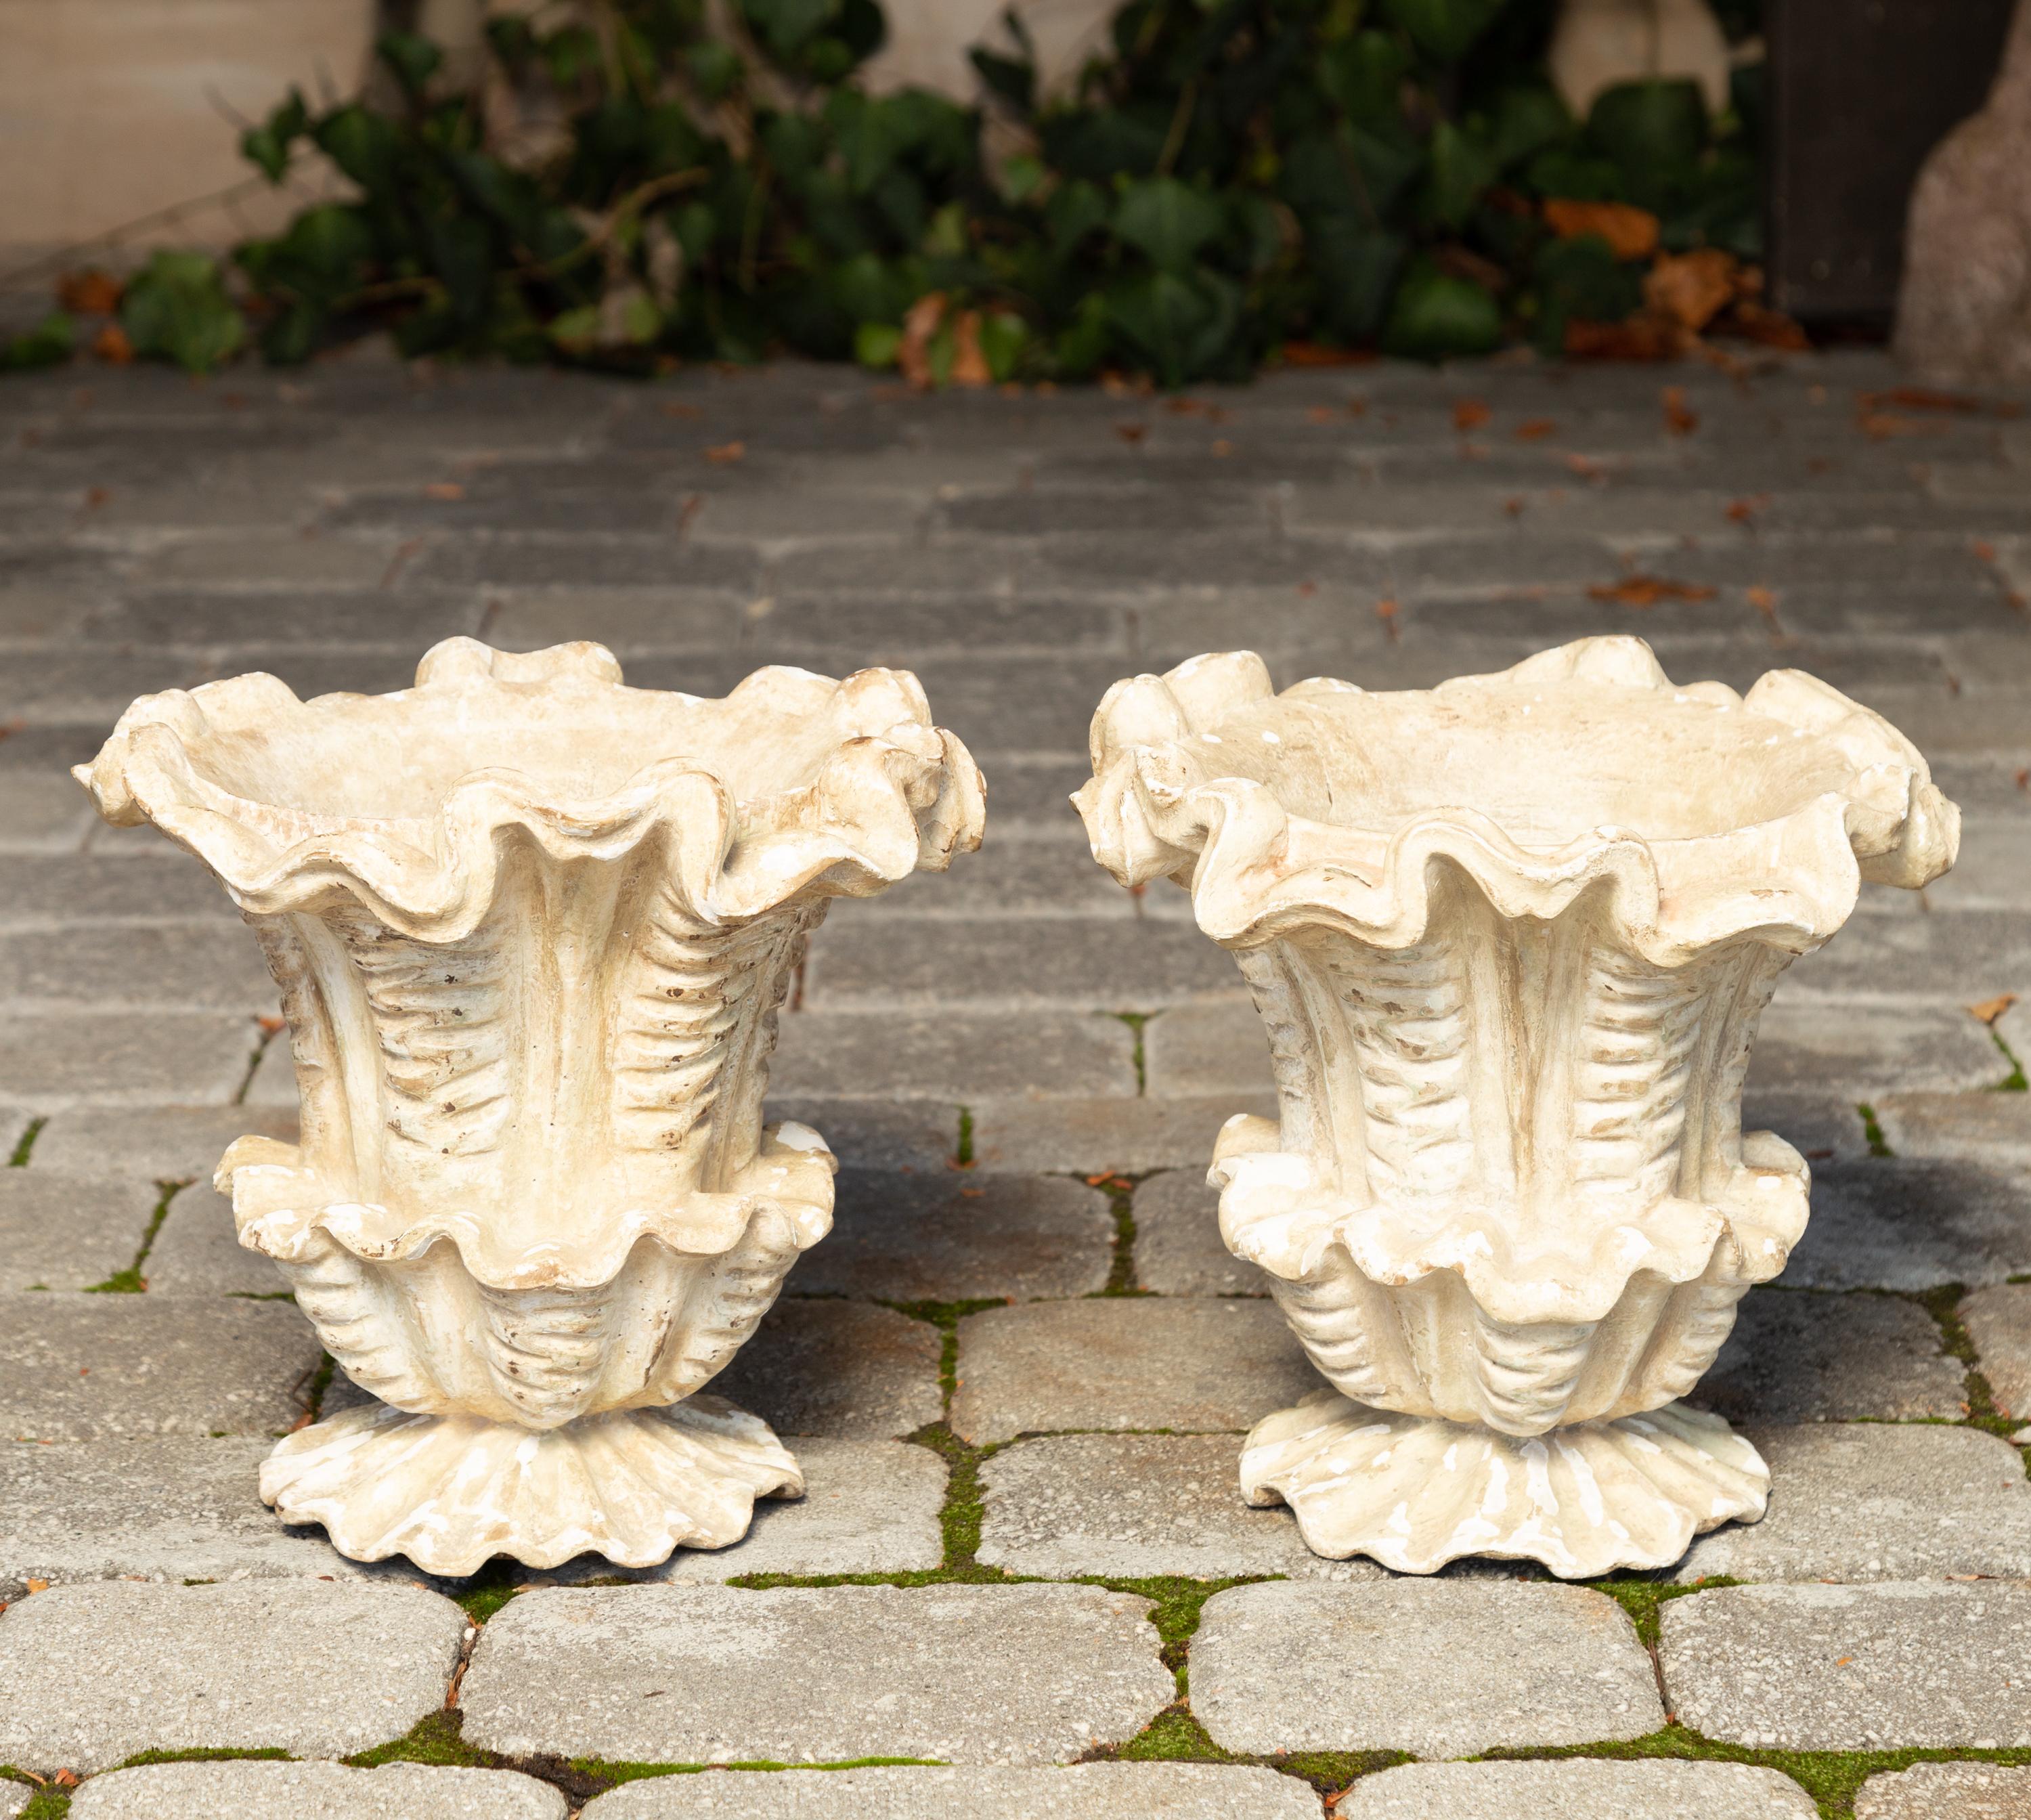 A pair of Italian carved and painted wooden floral-shaped urns from the first half of the 20th century with weathered finish. Born in Italy during the second quarter of the 20th century, each of this charming pair of carved urns attracts our